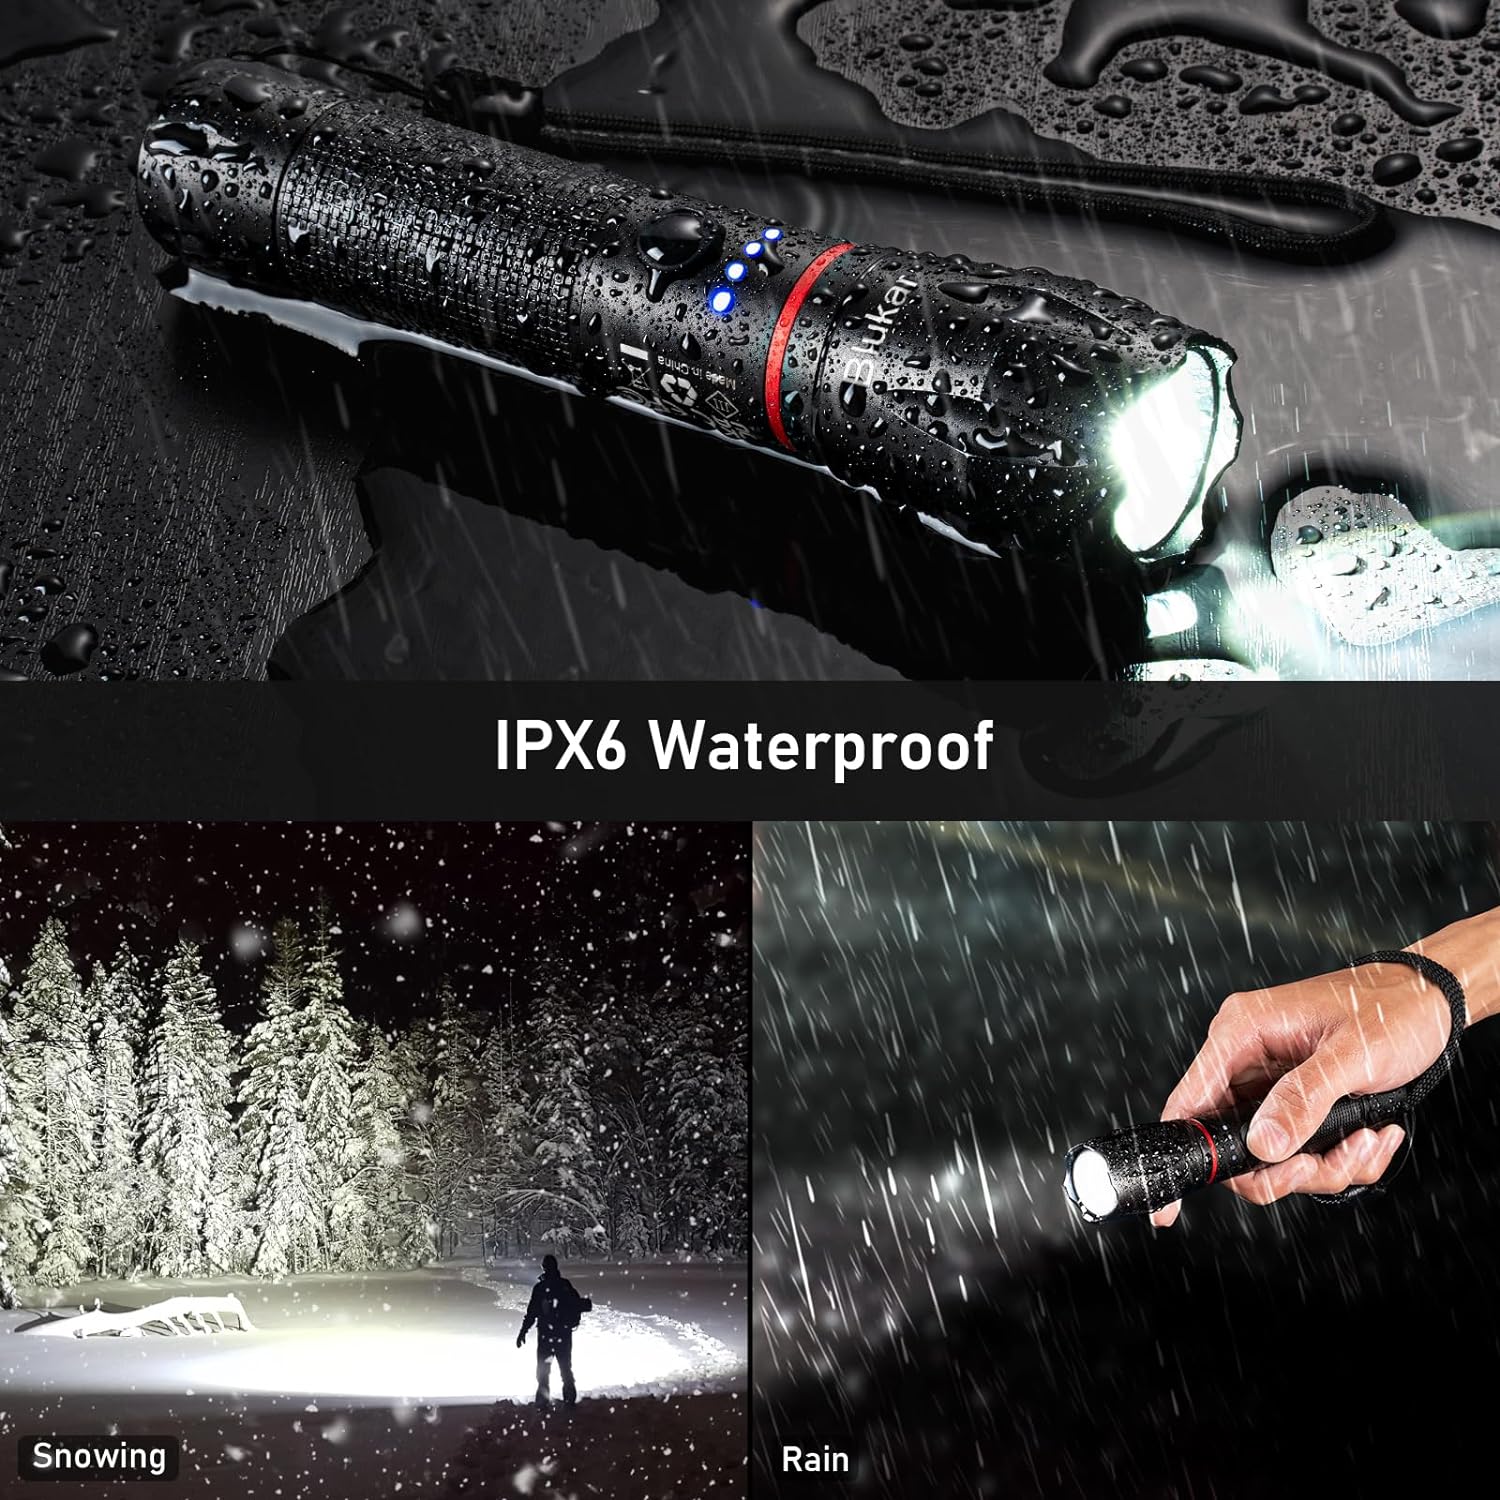 Blukar Waterproof Lightweight Mini Handheld LED Torch Rechargeable with Adjustable Focus & 5 Modes